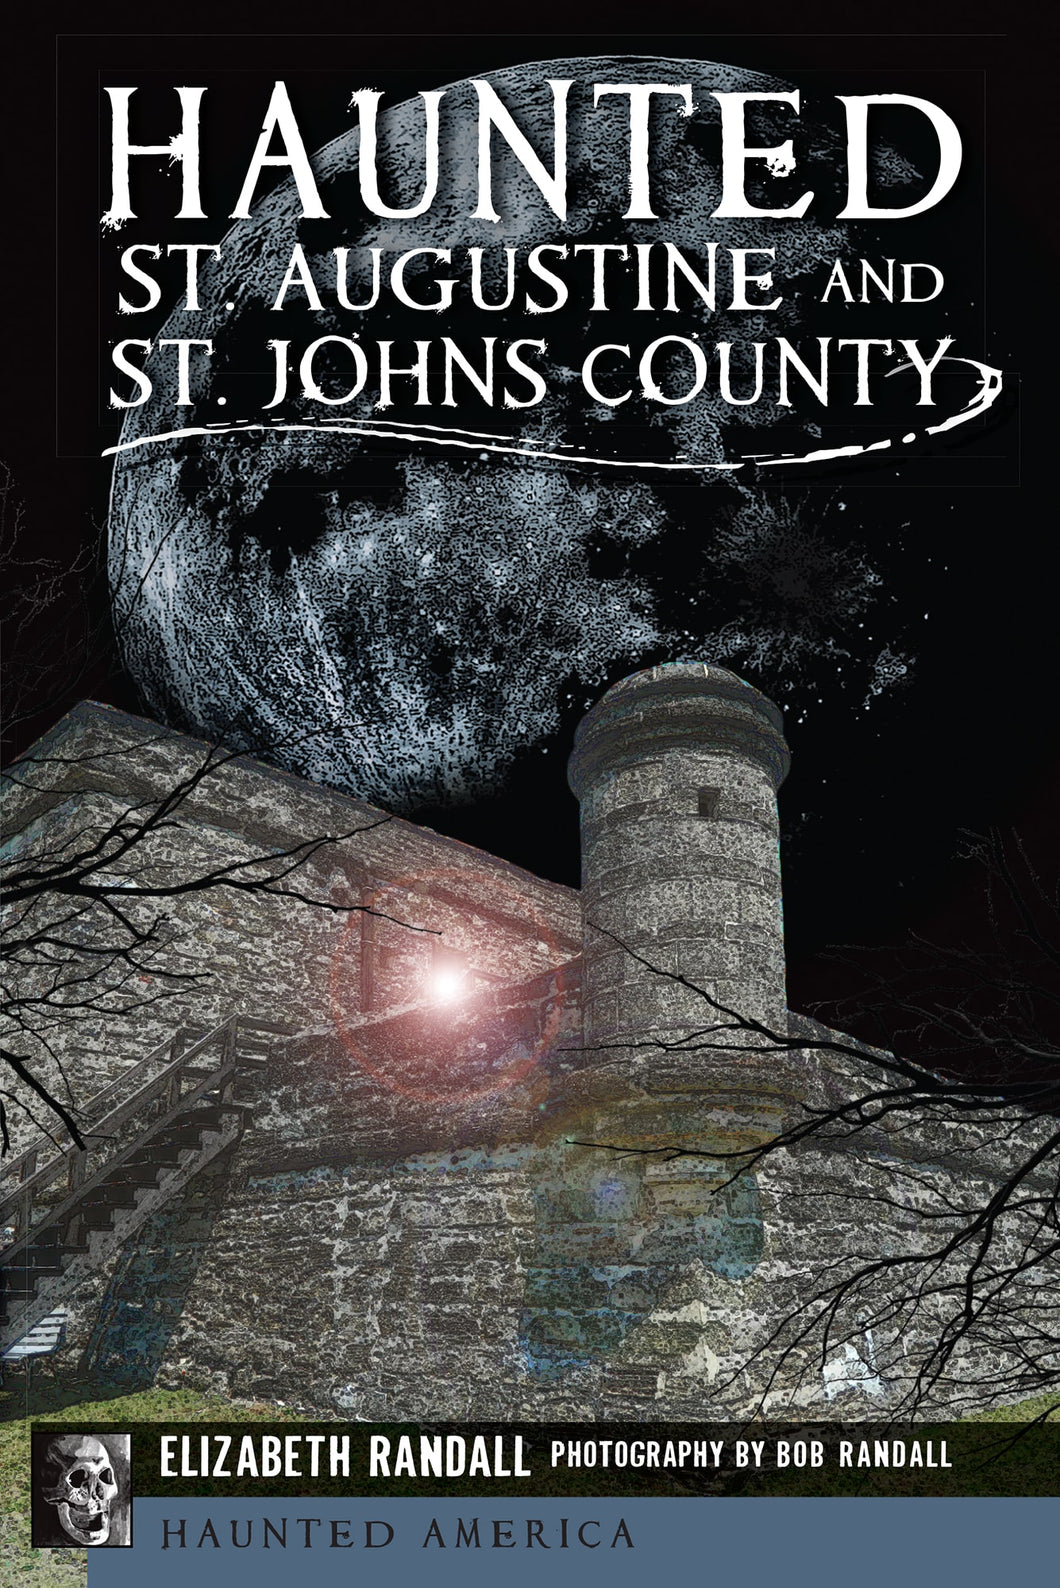 Haunted St. Augustine and St Johns County - Book by Elizabeth Randall